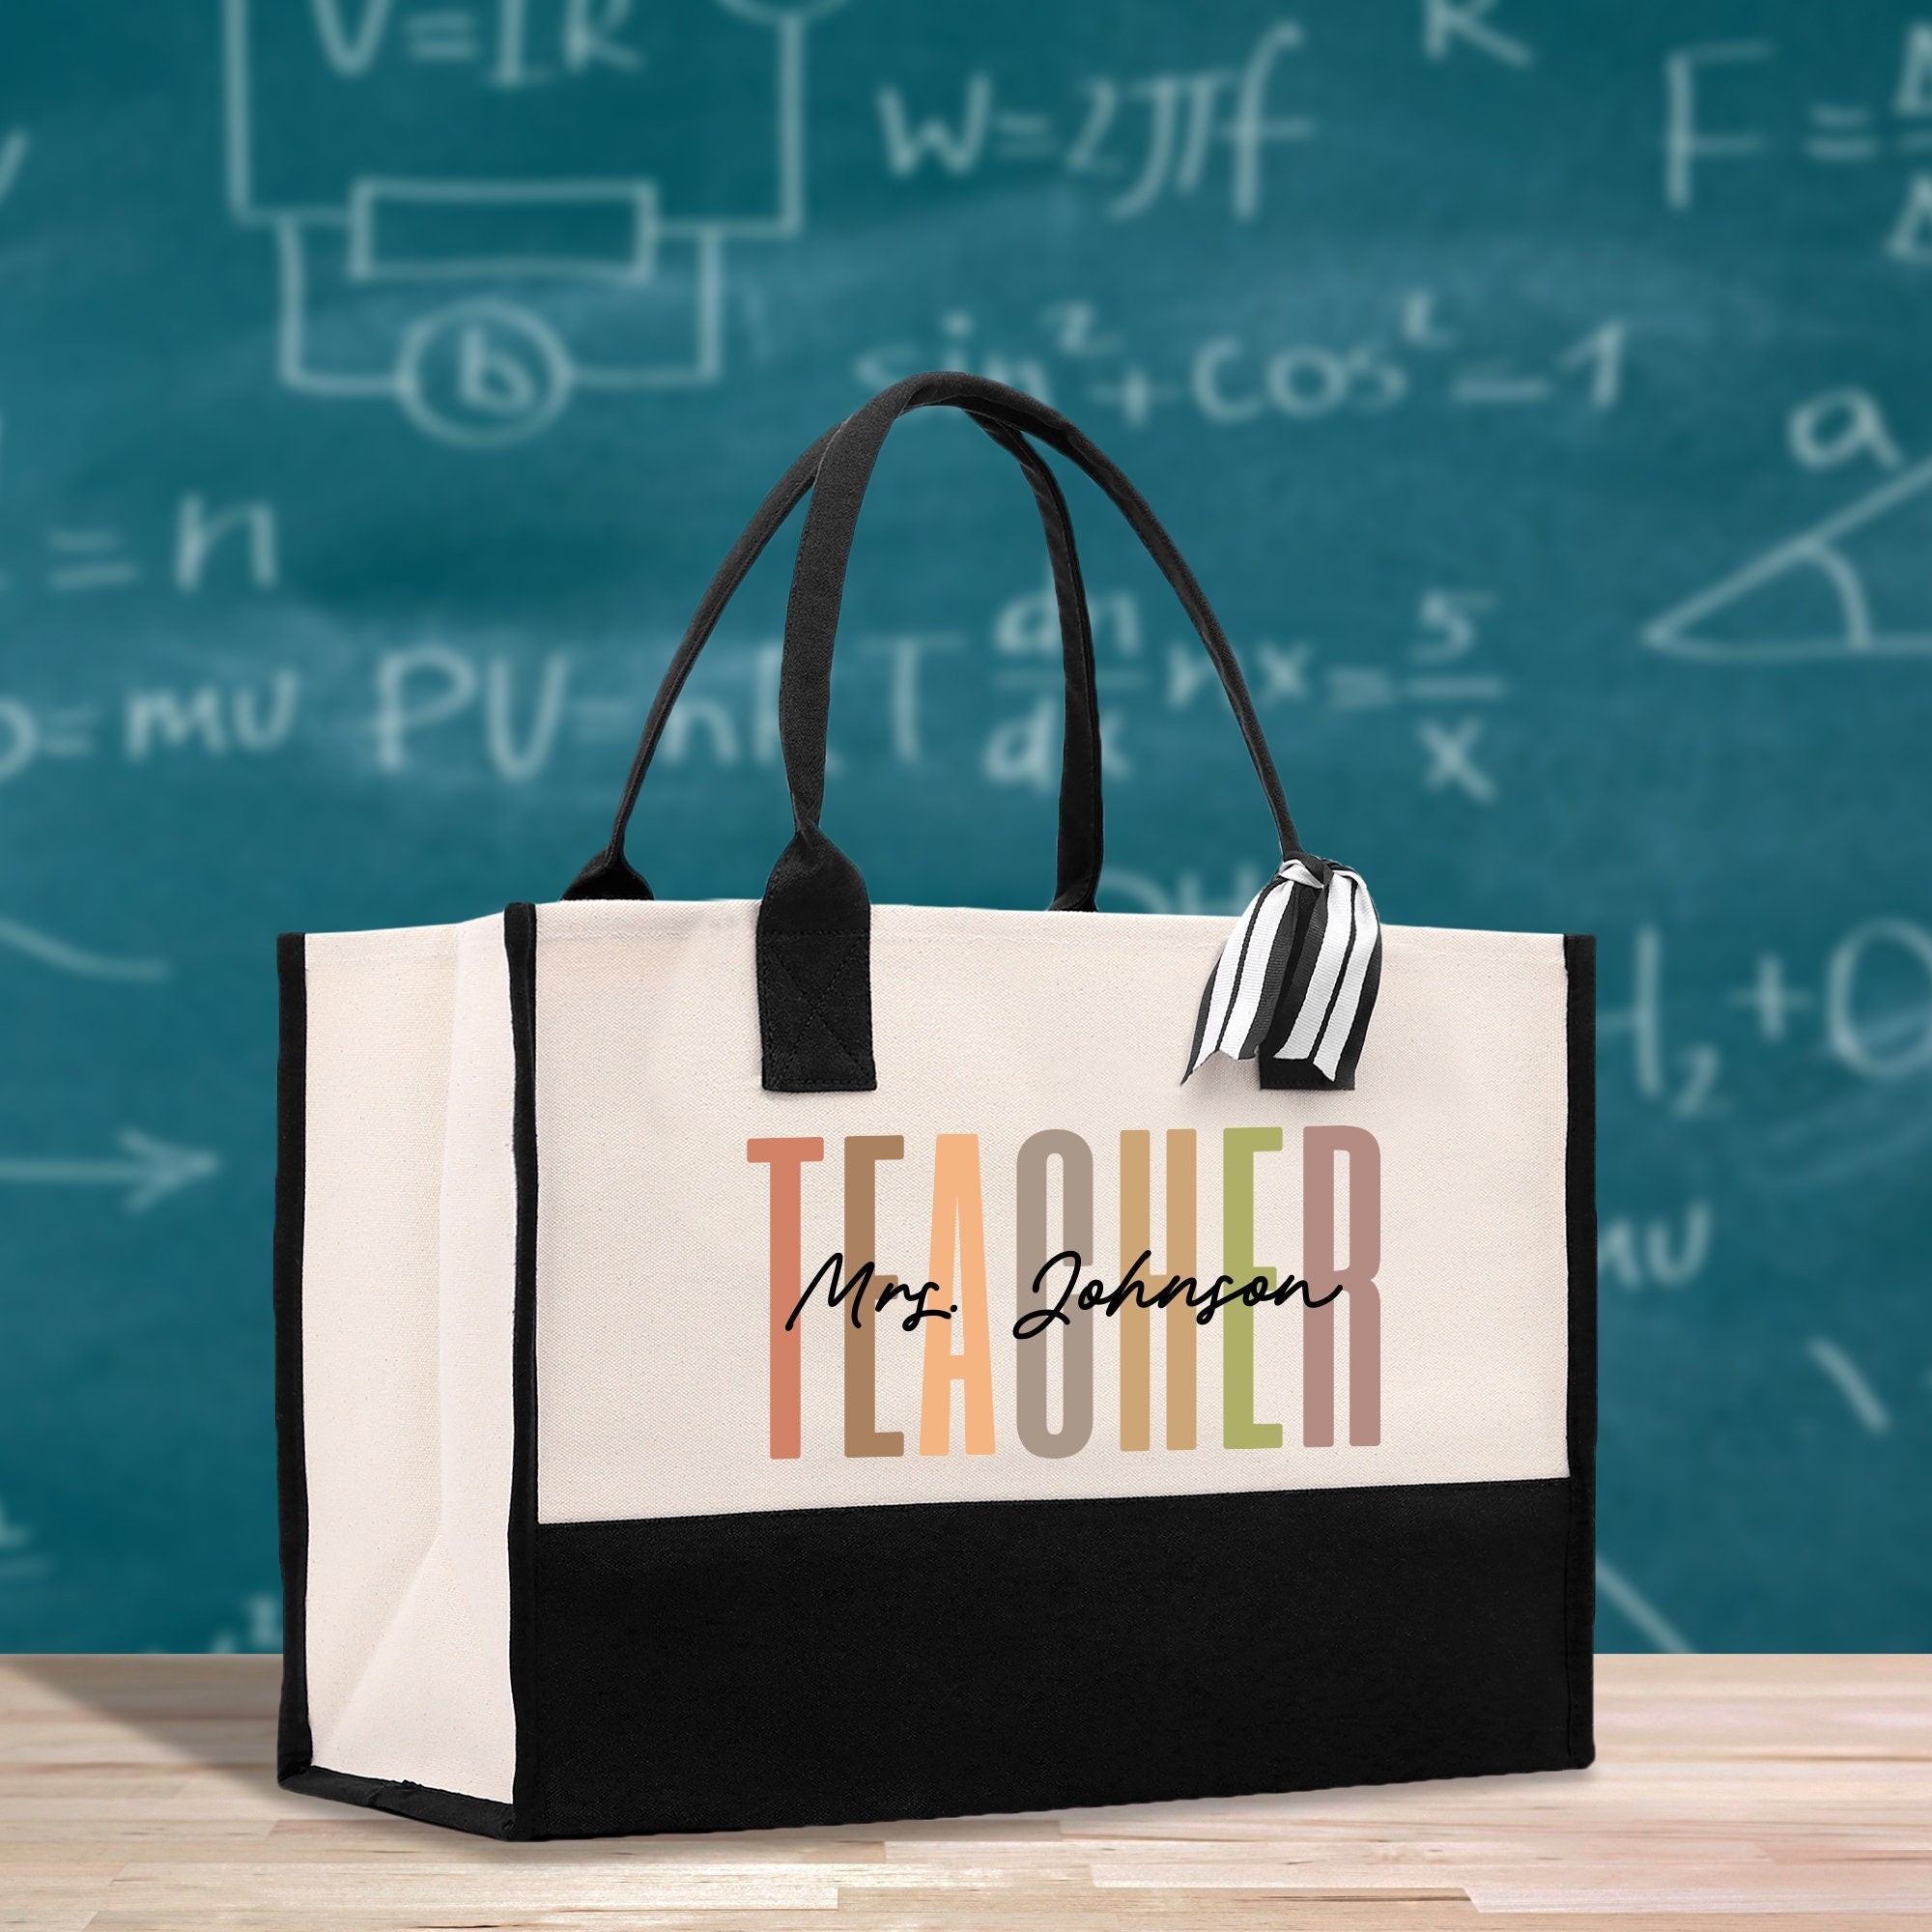 a teacher bag sitting on a table in front of a chalkboard